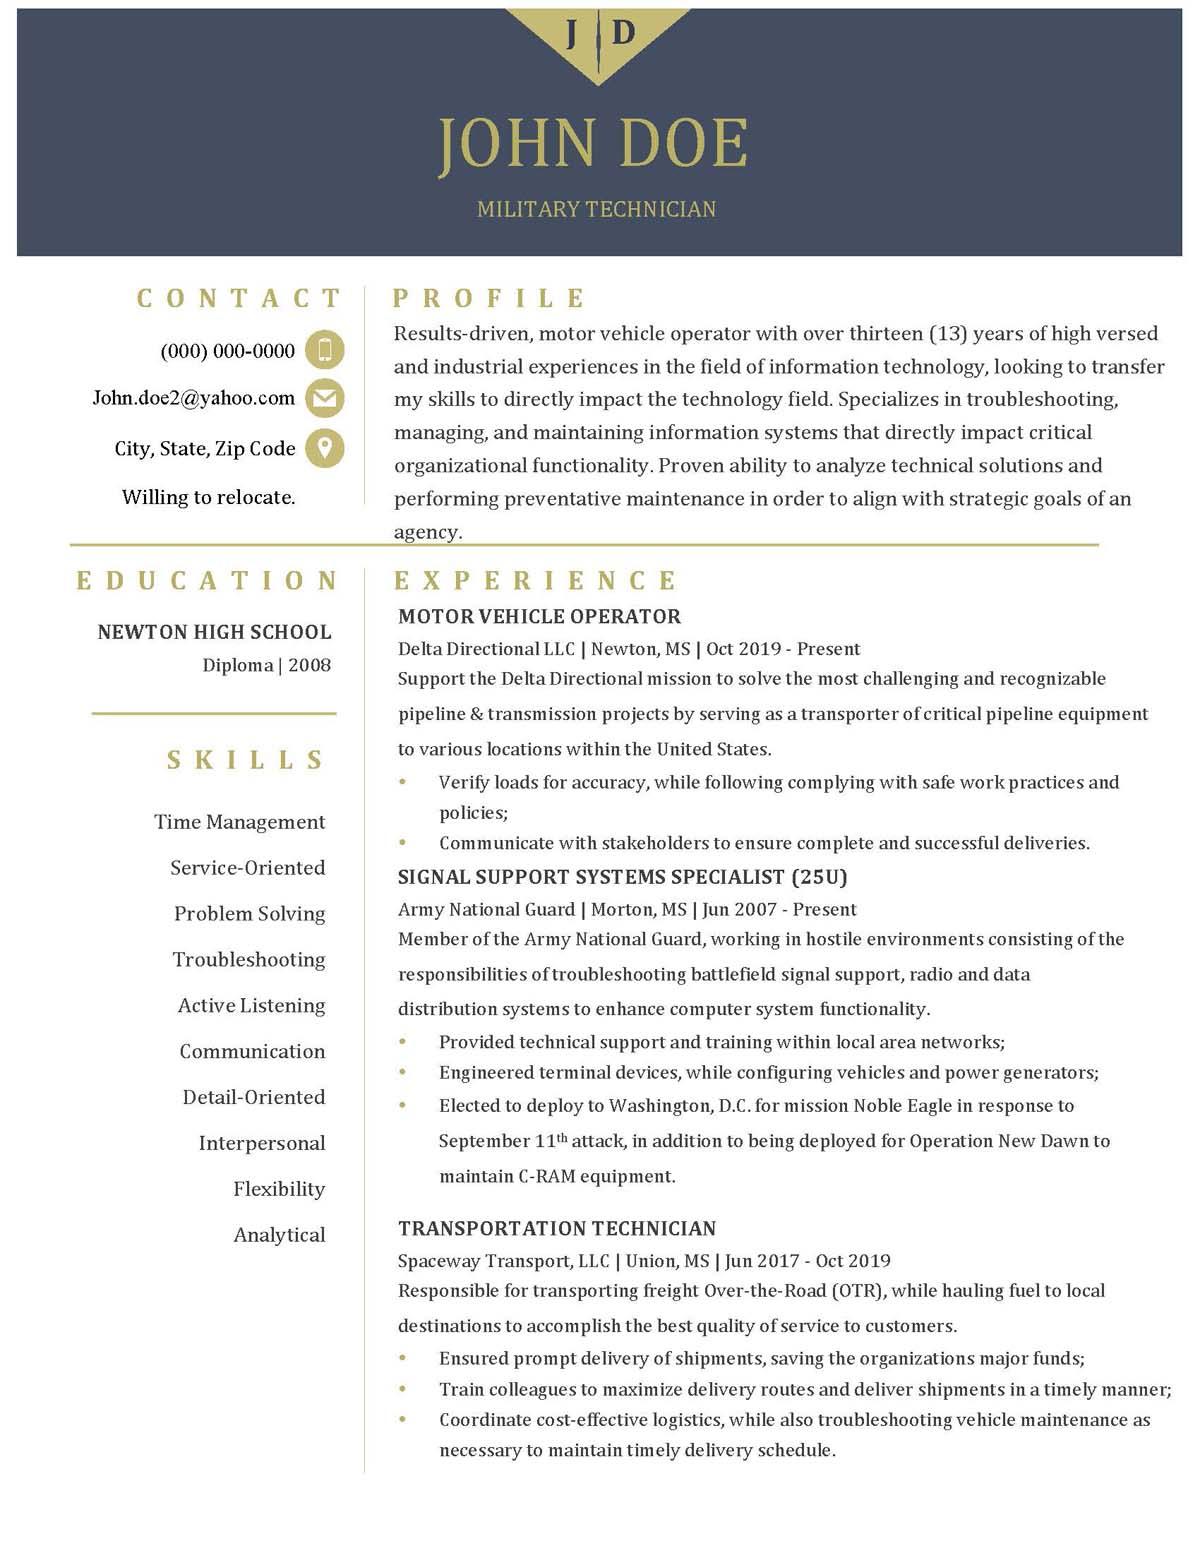 Sample resume: Military Services, High Experience, Chronological